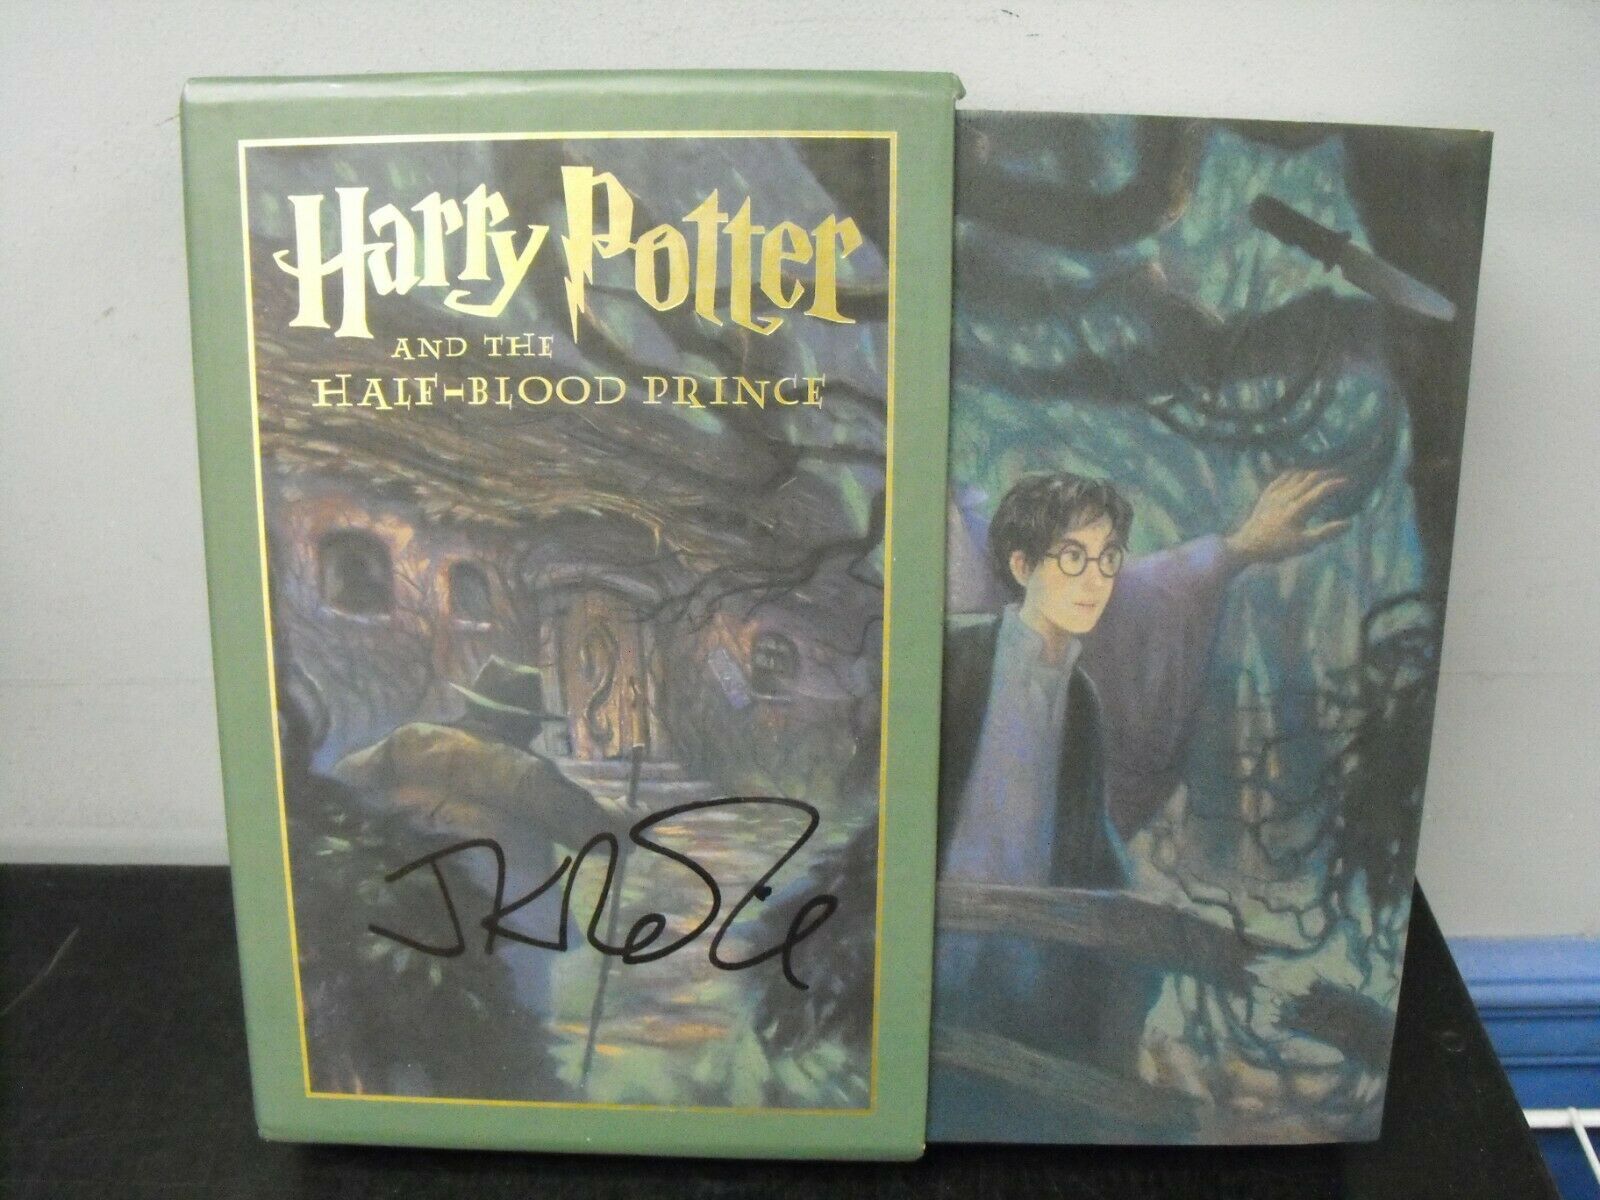 J.K. Rowling signature forgery found on ebay on the cover of the slipcase of the US Deluxe Edition Harry Potter and the Half-Blood Prince. Sold by rmghobbies